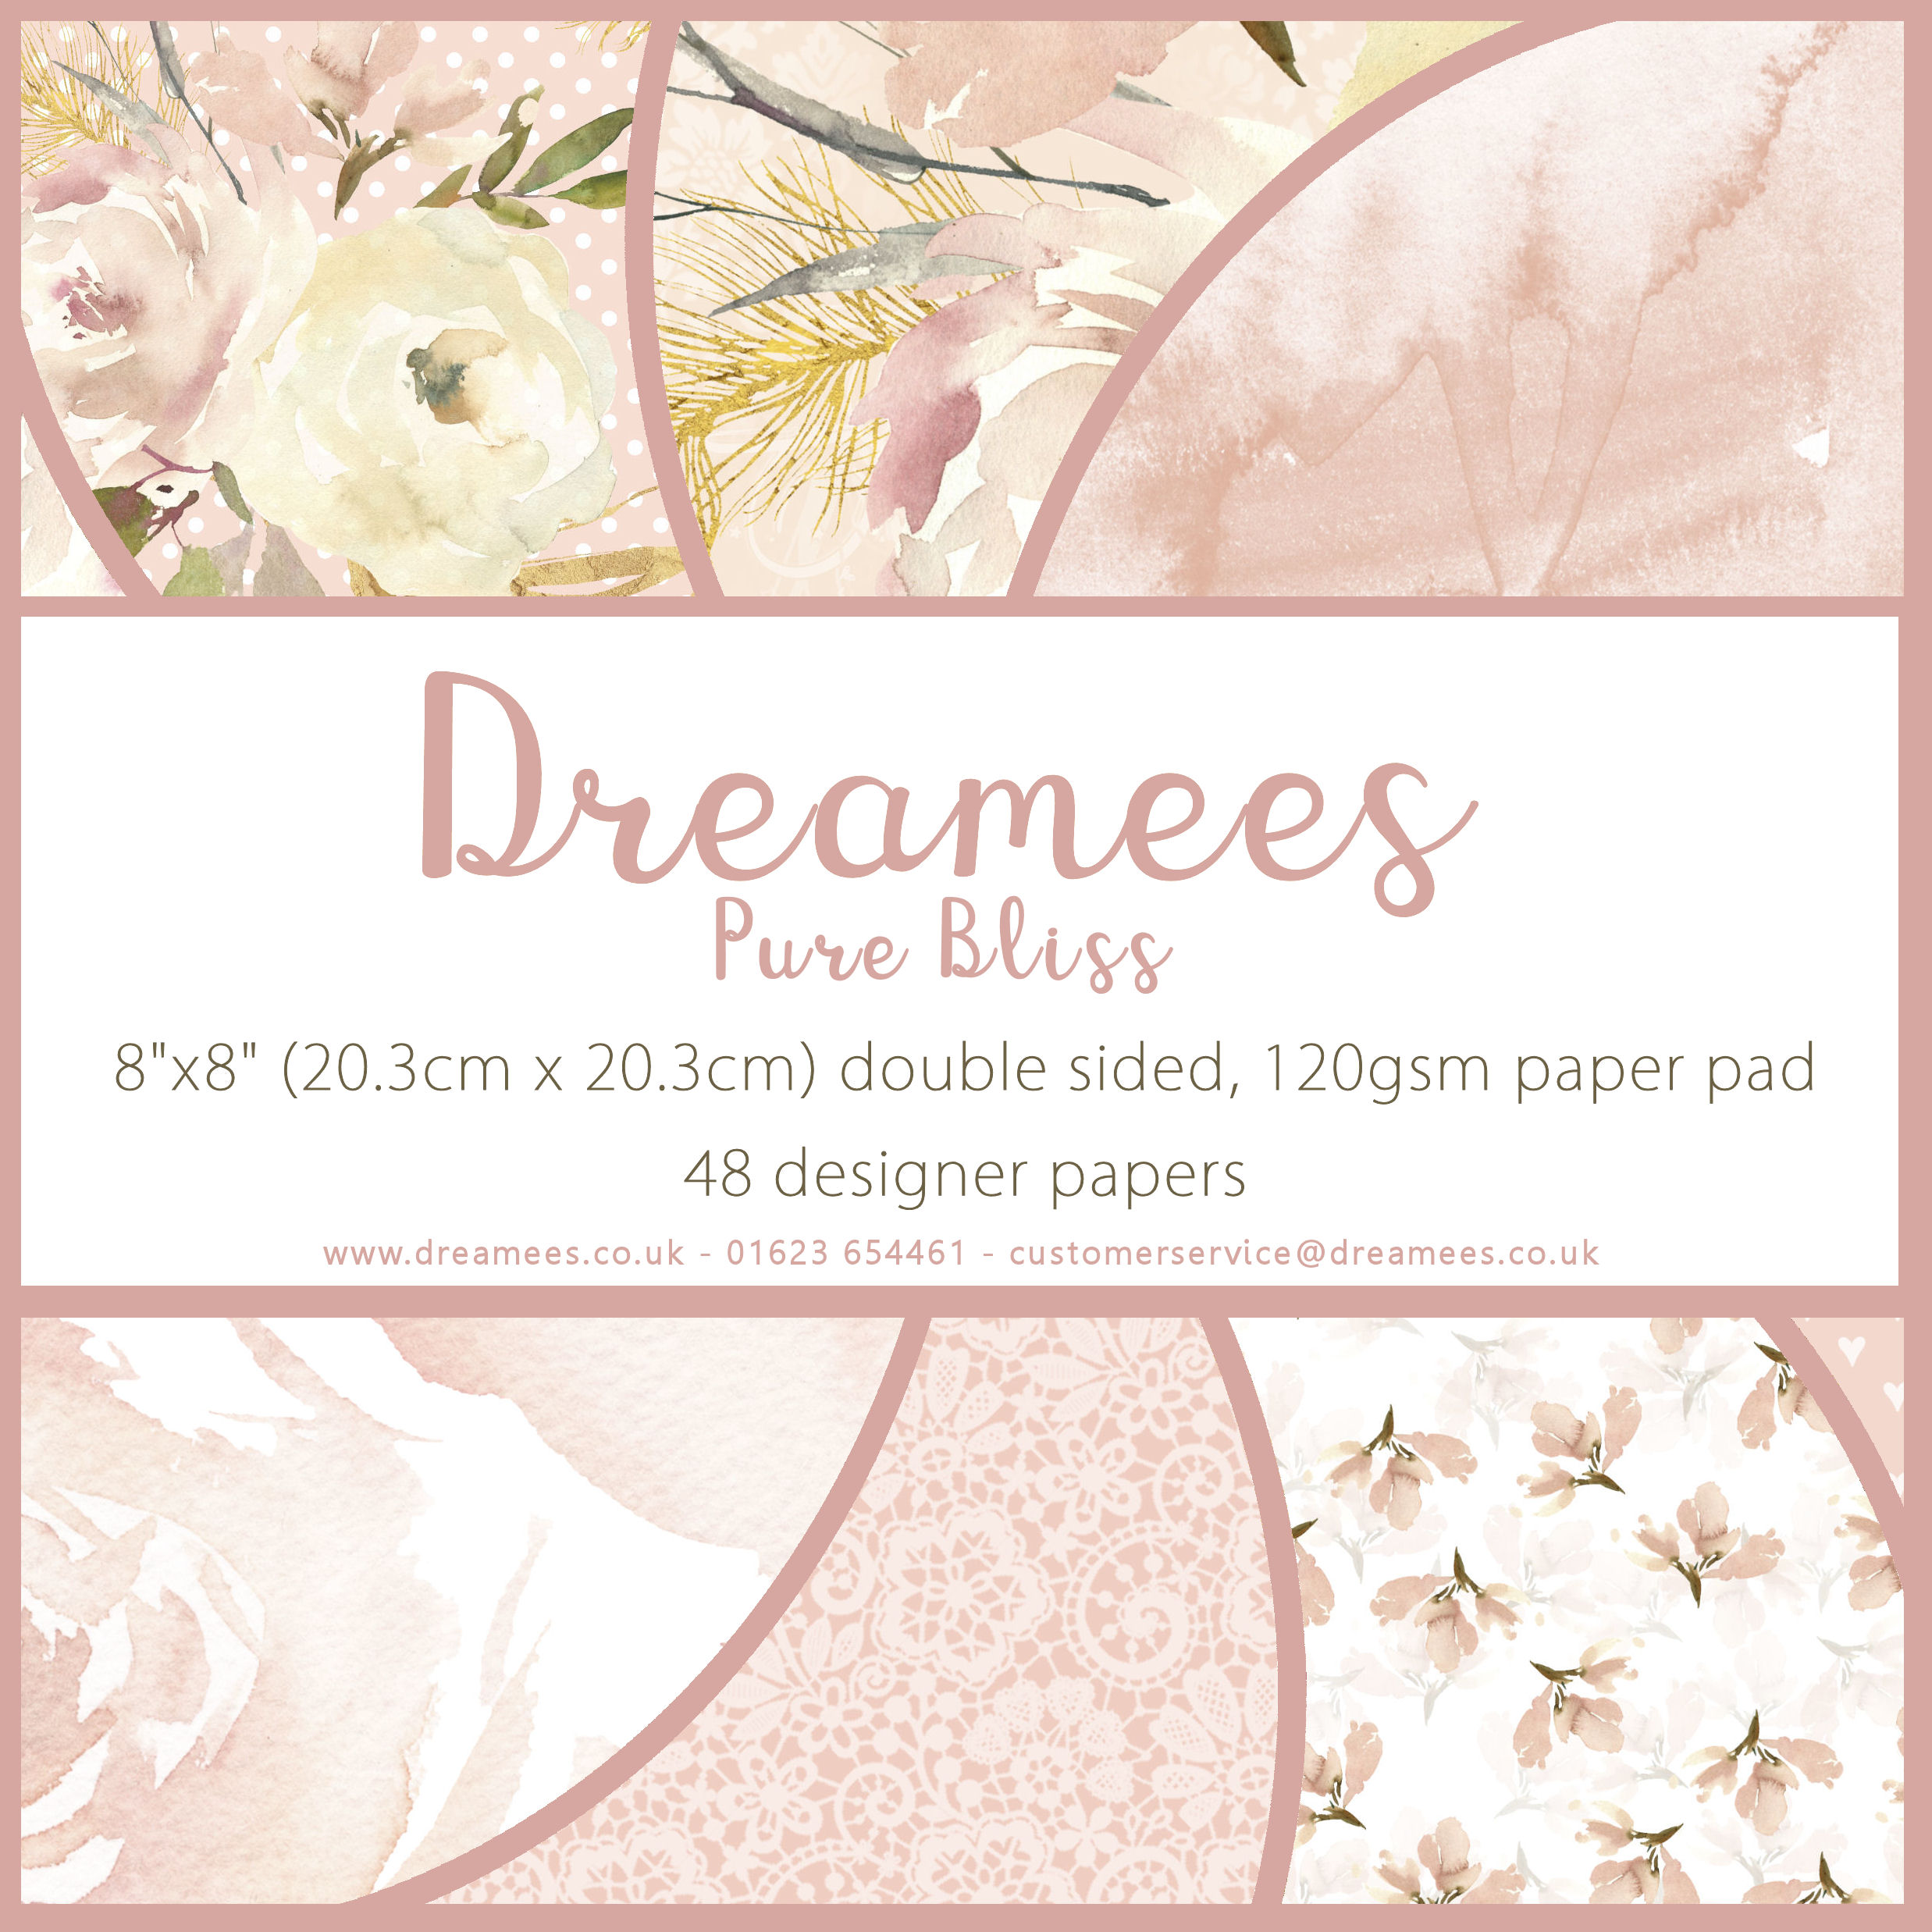 Dreamees Pure Bliss 8x8 Paper Pad